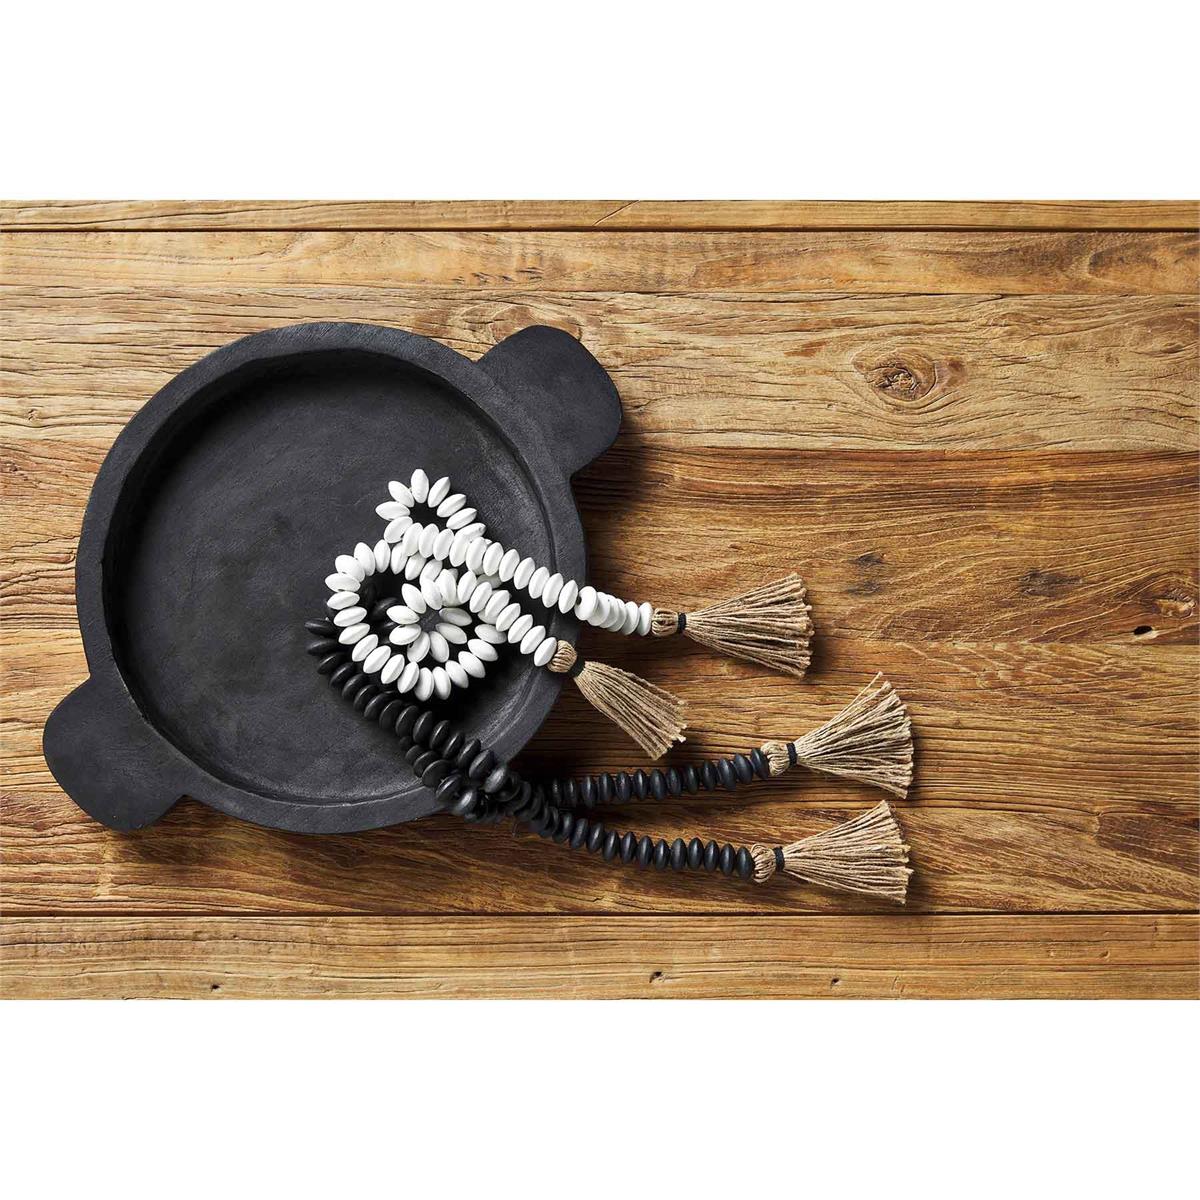 one black and one white tassel decor beads displayed in a black tray on a wooden surface